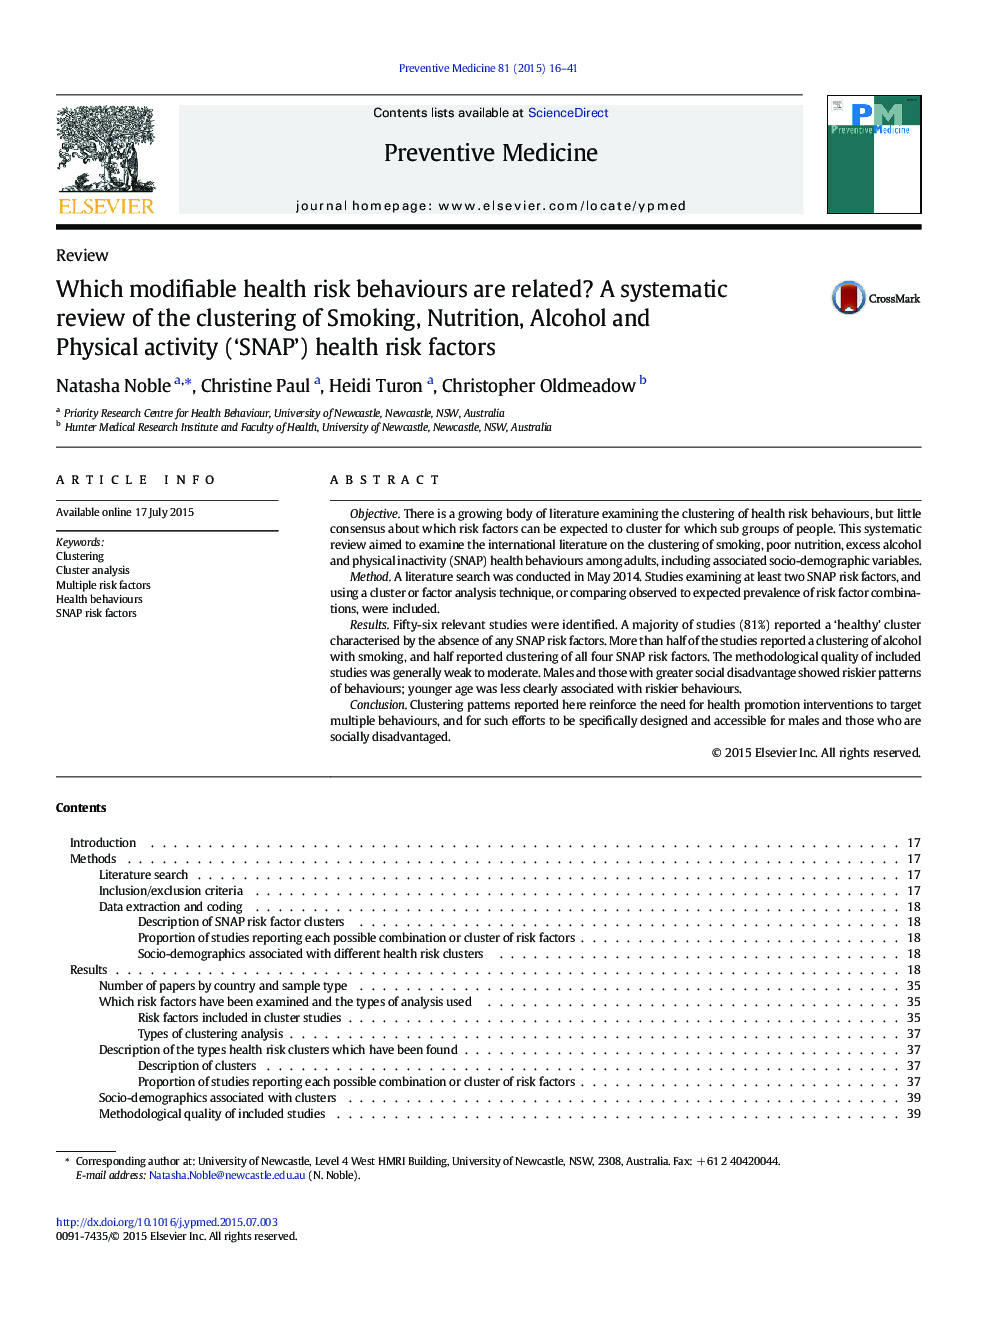 ReviewWhich modifiable health risk behaviours are related? A systematic review of the clustering of Smoking, Nutrition, Alcohol and Physical activity ('SNAP') health risk factors